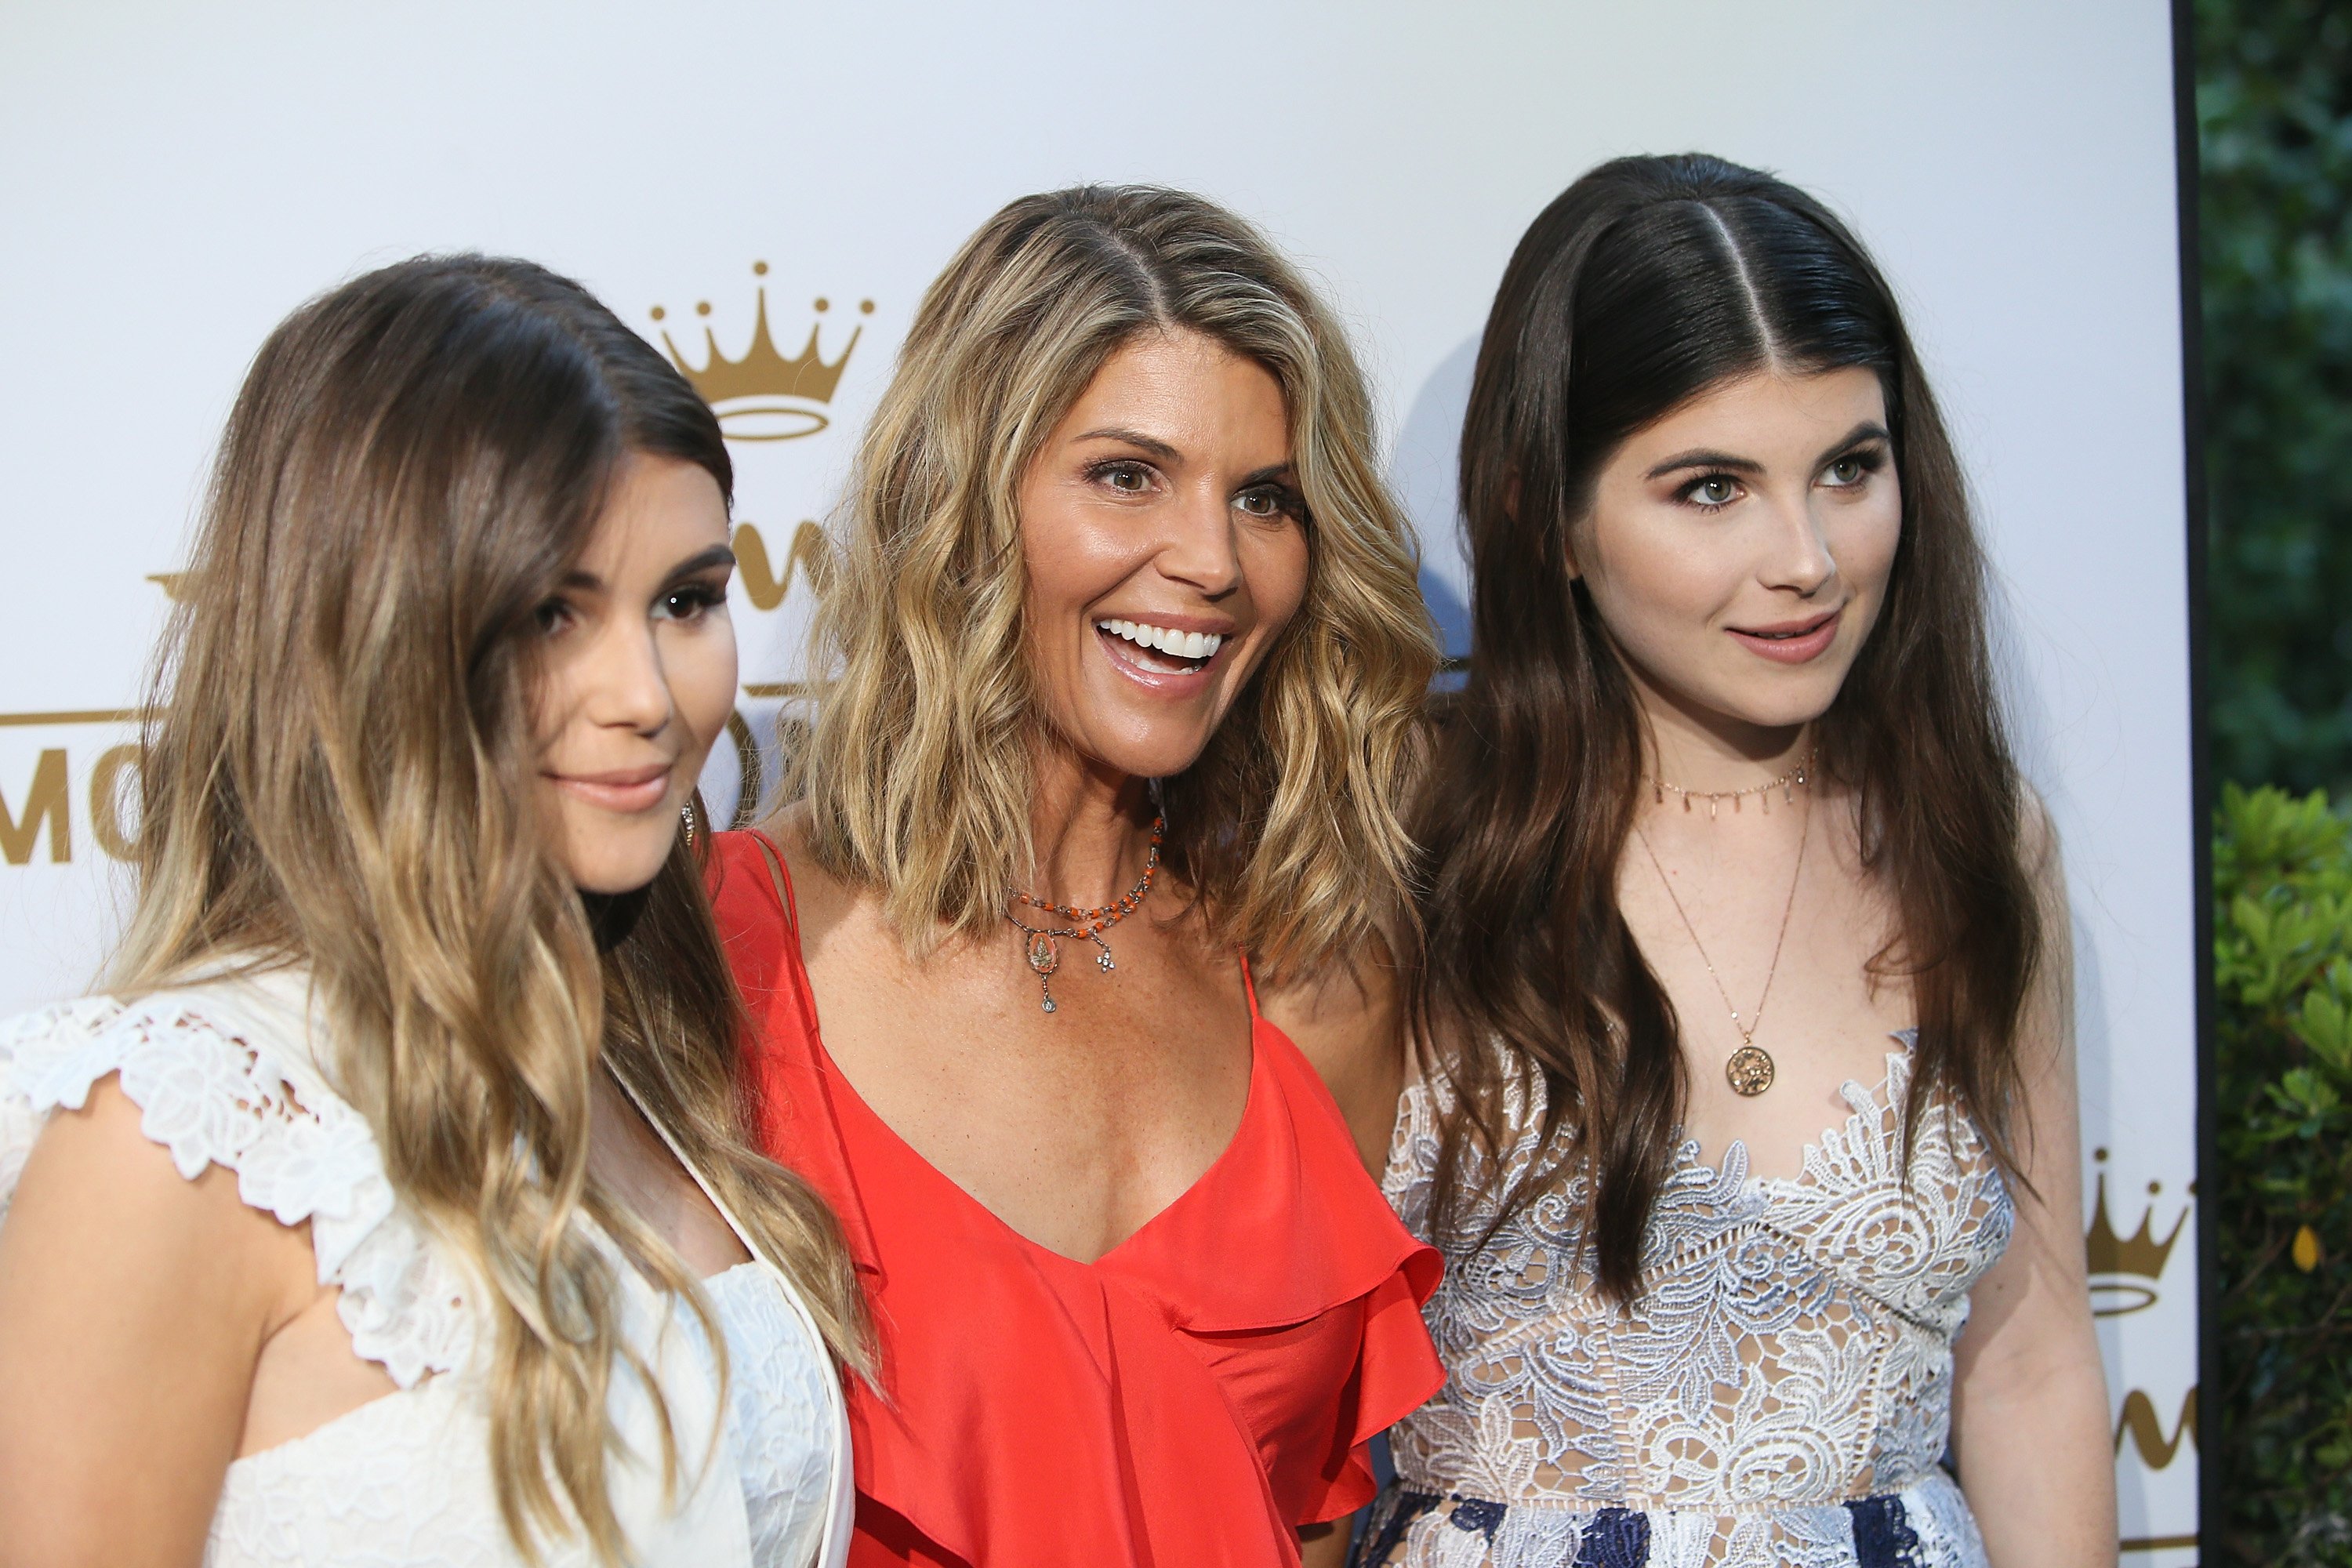 Lori Loughlin, Isabella Rose and Olivia Jade Giannulli attend the Hallmark Channel Summer TCA Tour on July 27, 2017, in Beverly Hills, California. | Source: Getty Images.